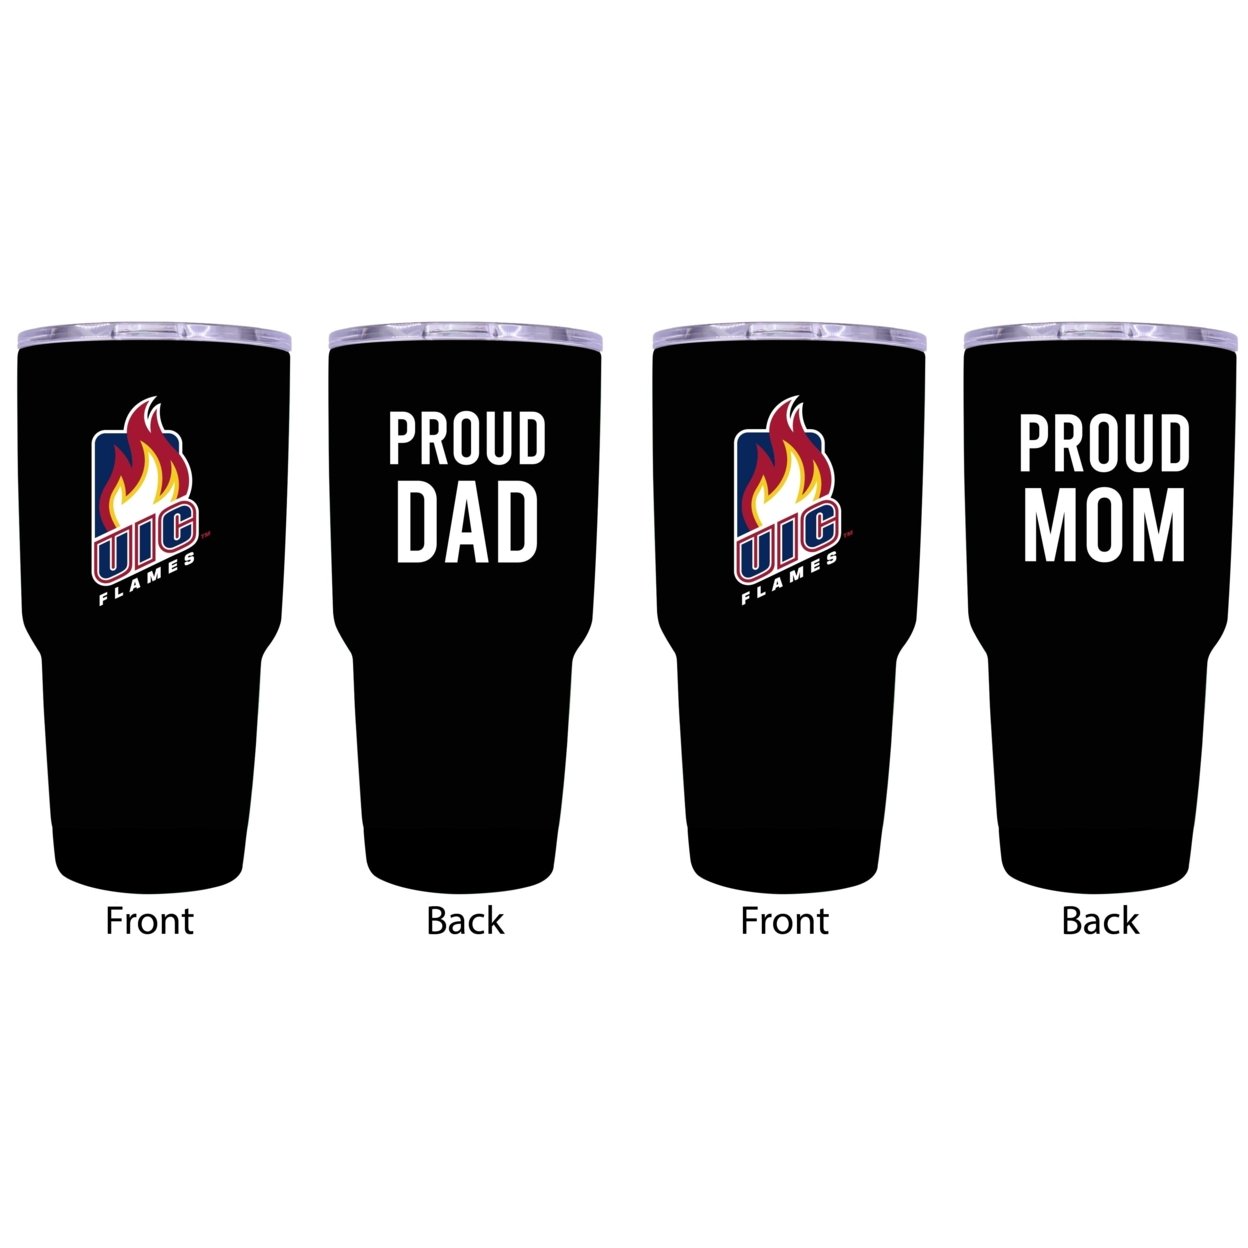 University Of Illinois At Chicago Proud Mom And Dad 24 Oz Insulated Stainless Steel Tumblers 2 Pack Black.